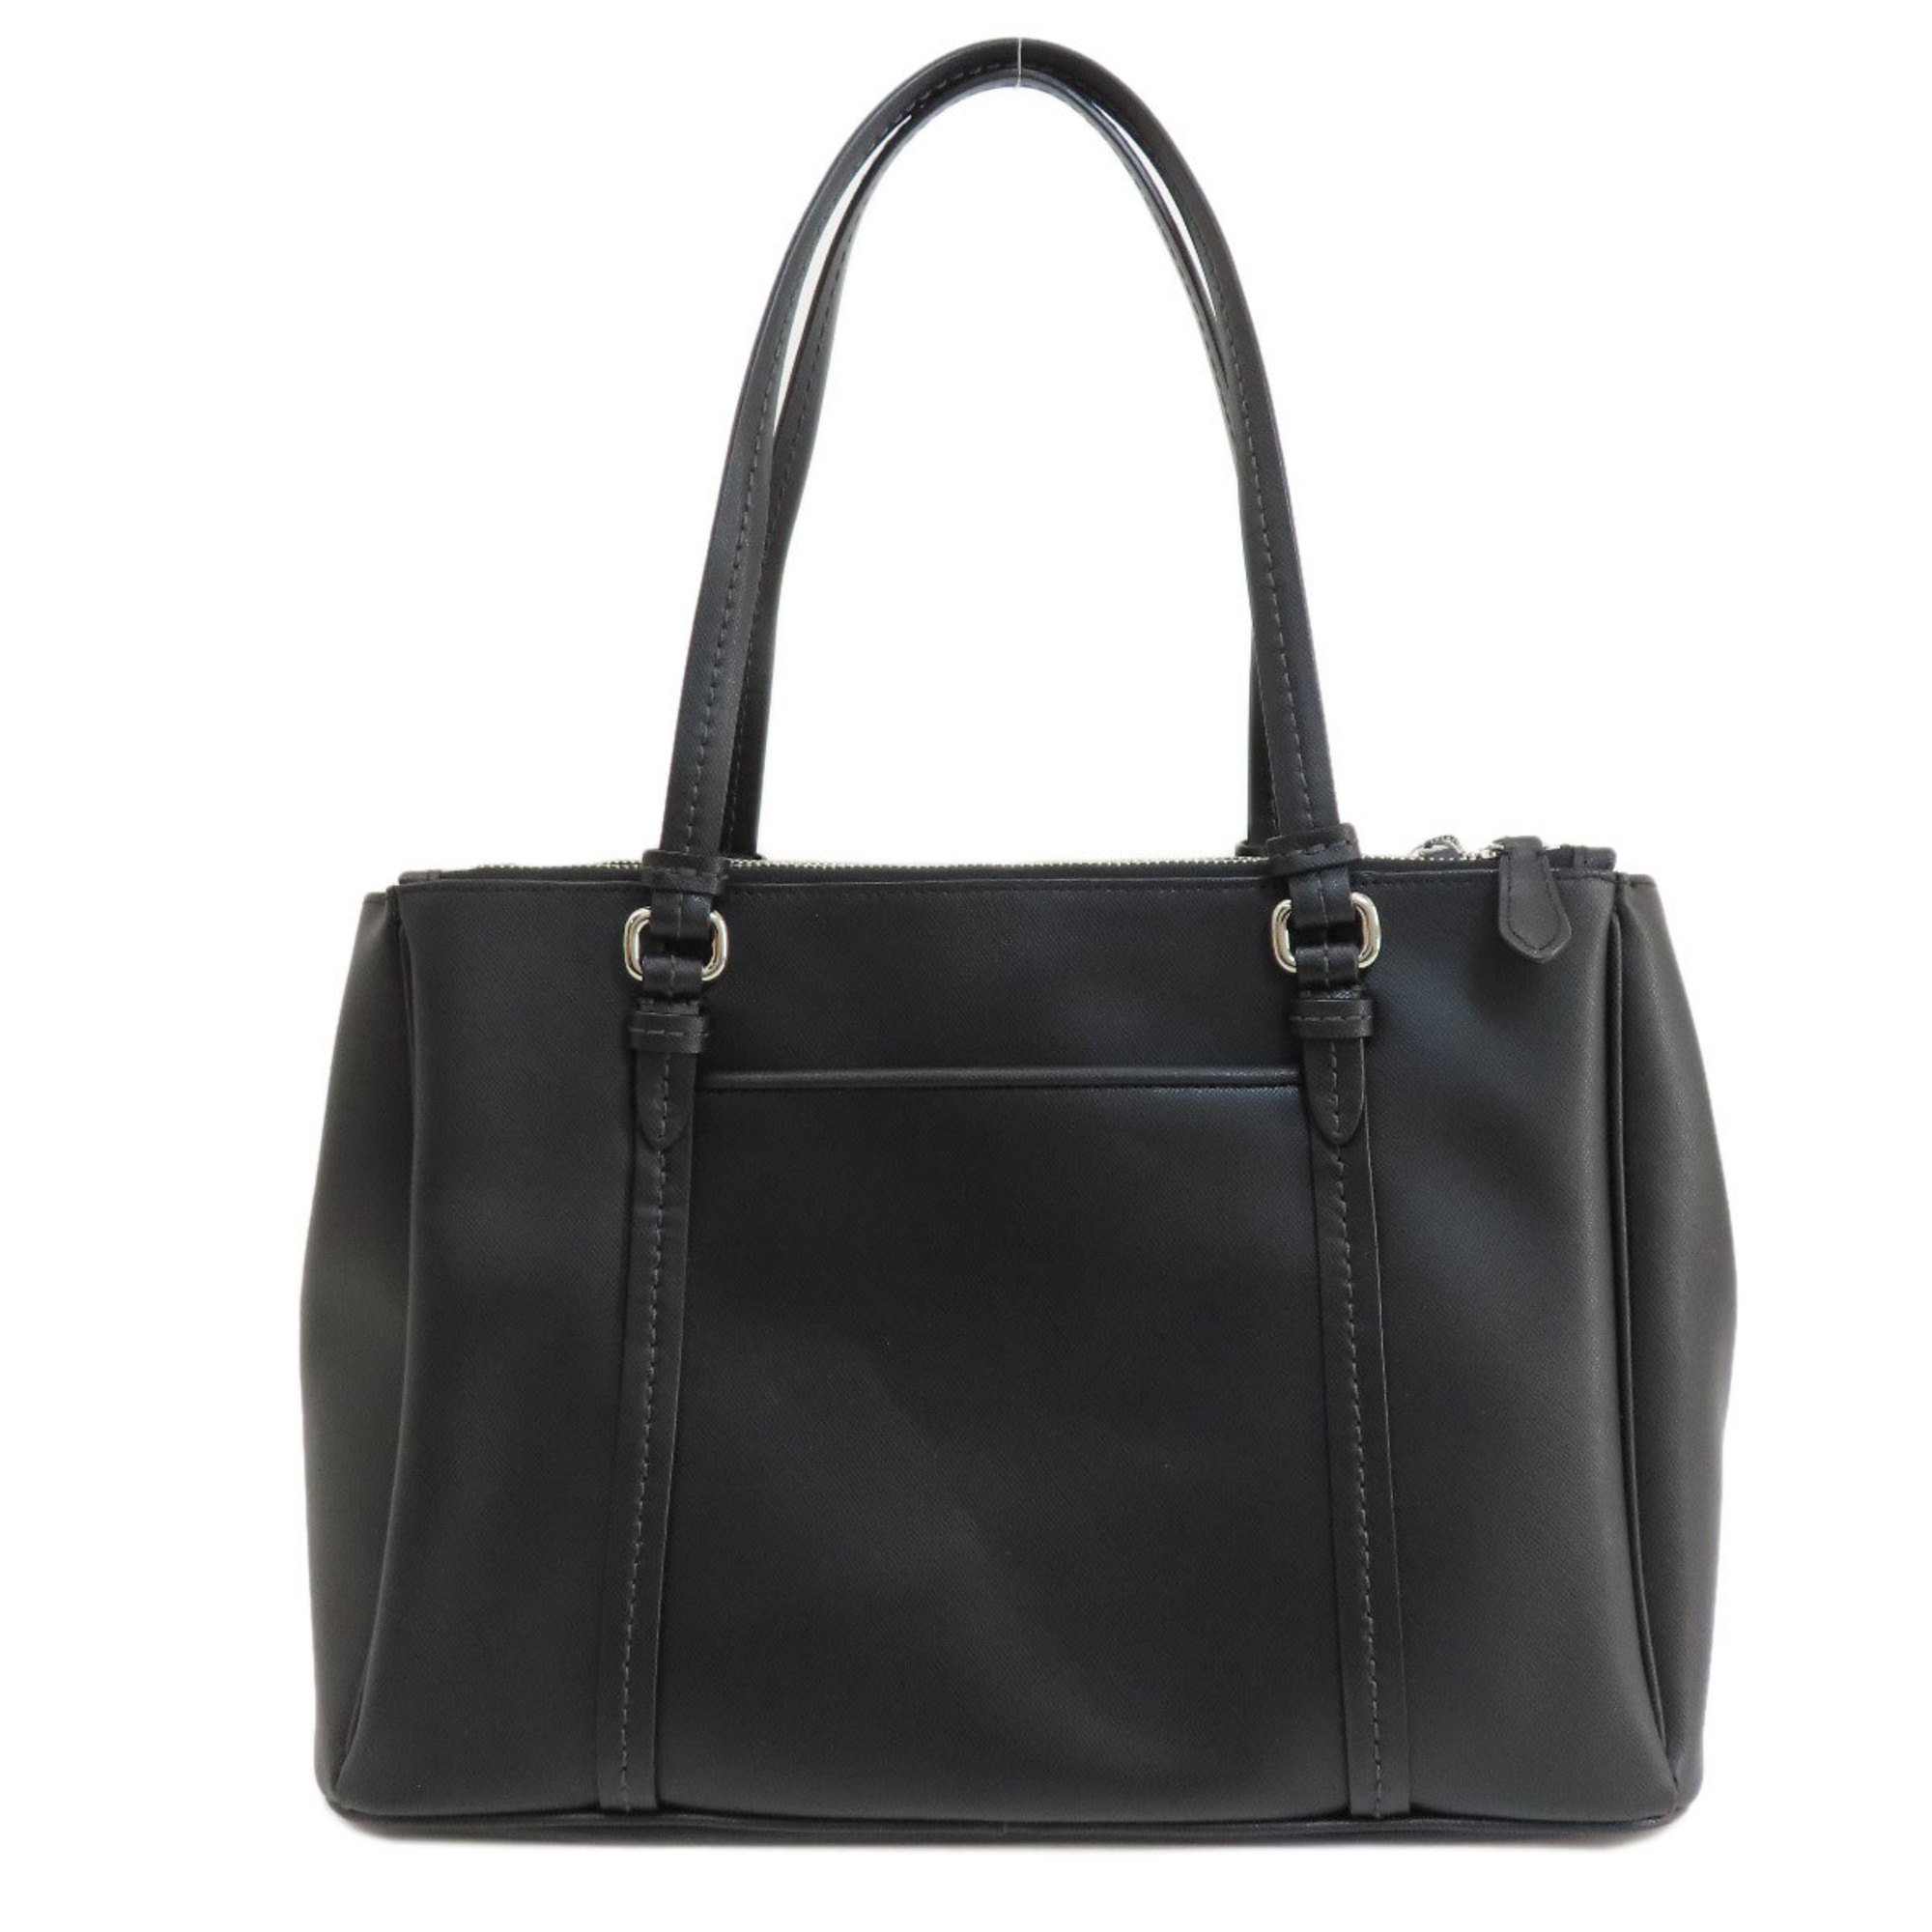 Coach F25669 Tote Bag Leather Women's